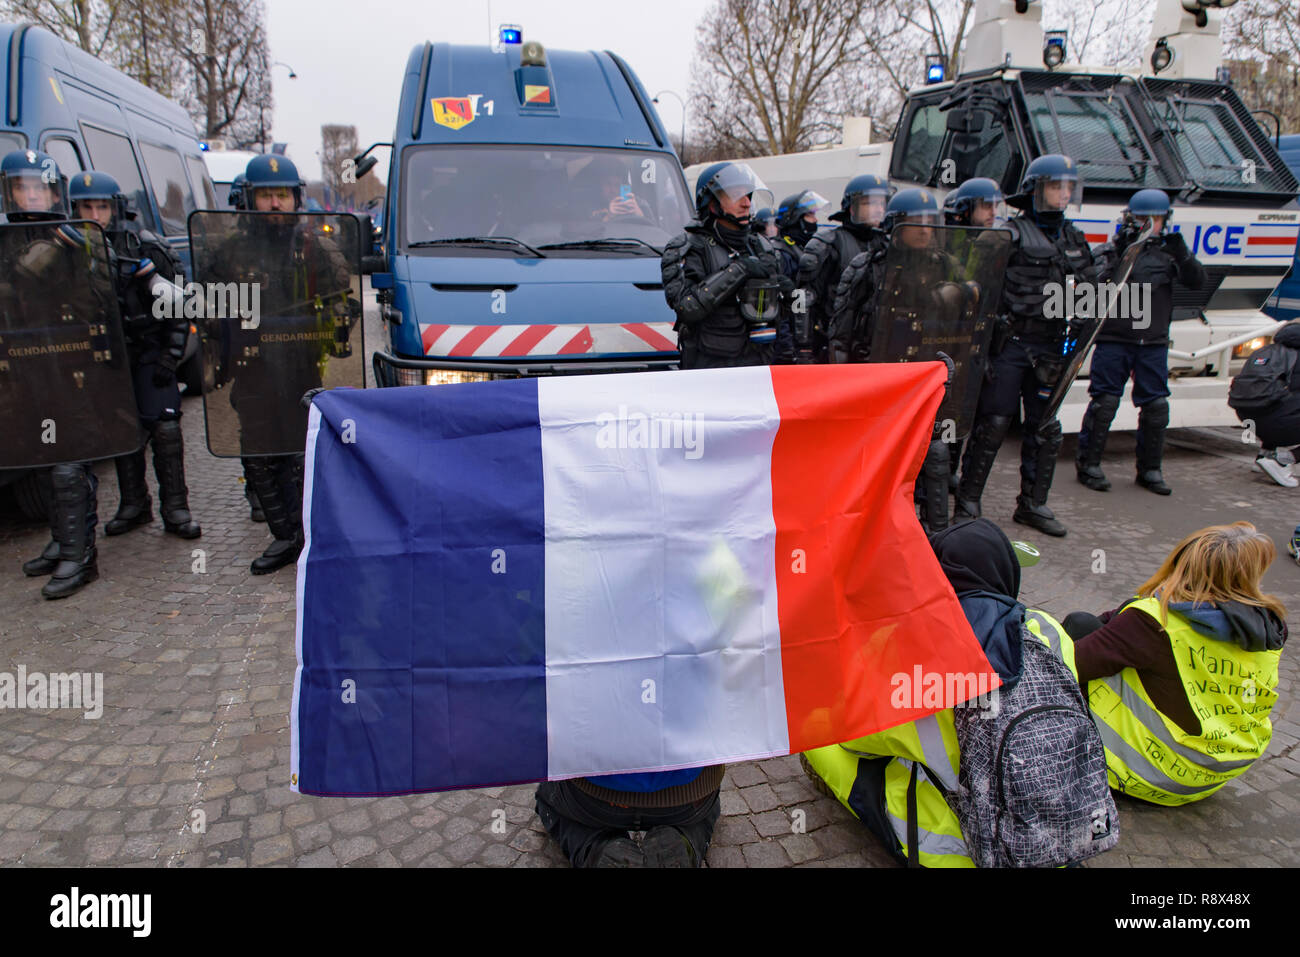 Yellow Vests demonstration (Gilets Jaunes) protesters against fuel tax, government, and President Macron with flag at Champs-Élysées, Paris, France Stock Photo